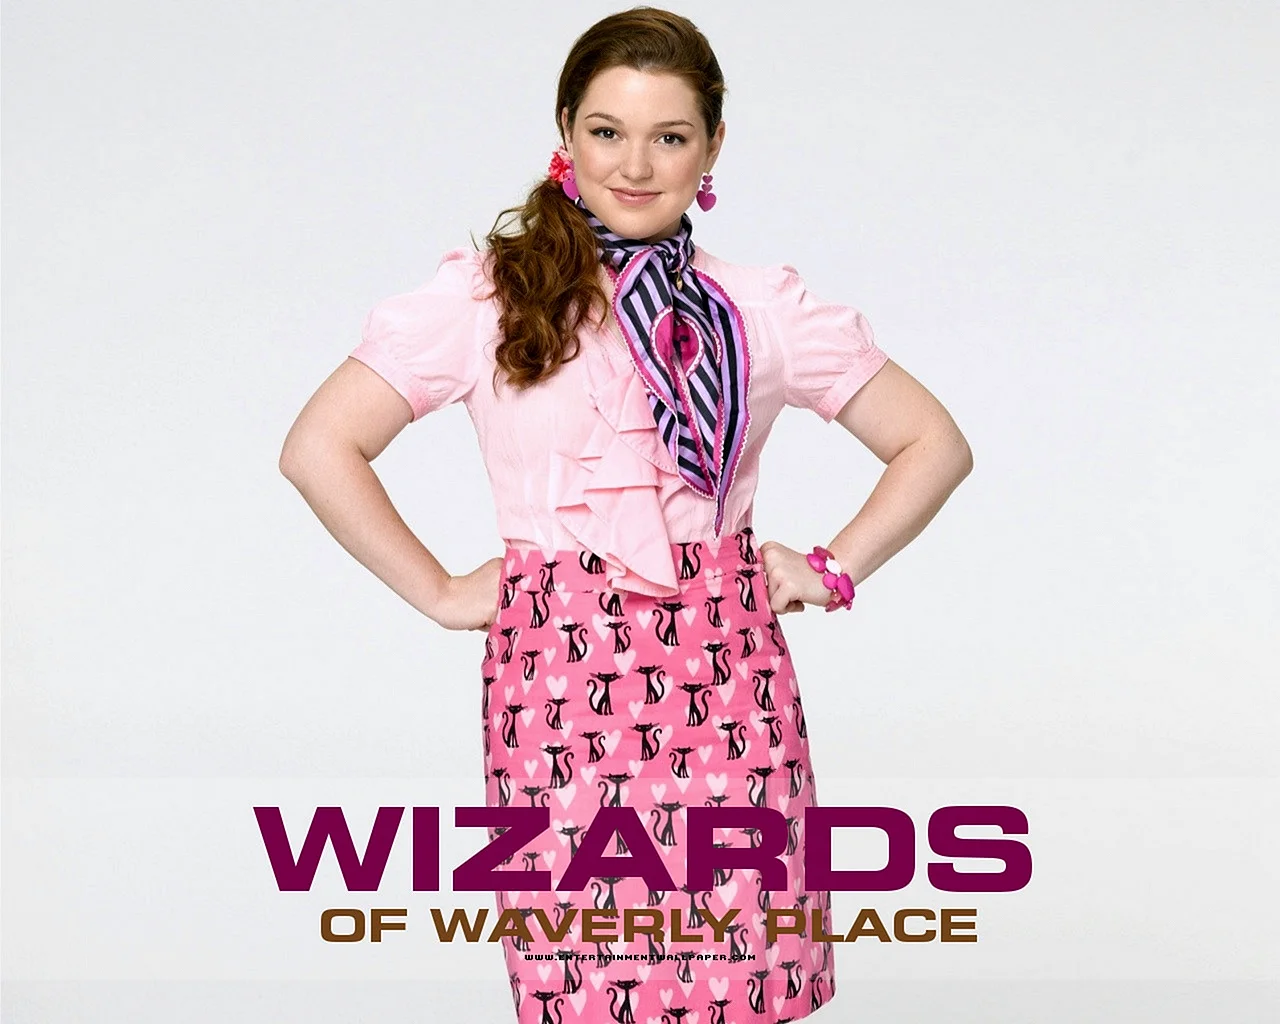 Harper Wizards Of Waverly Place Wallpaper